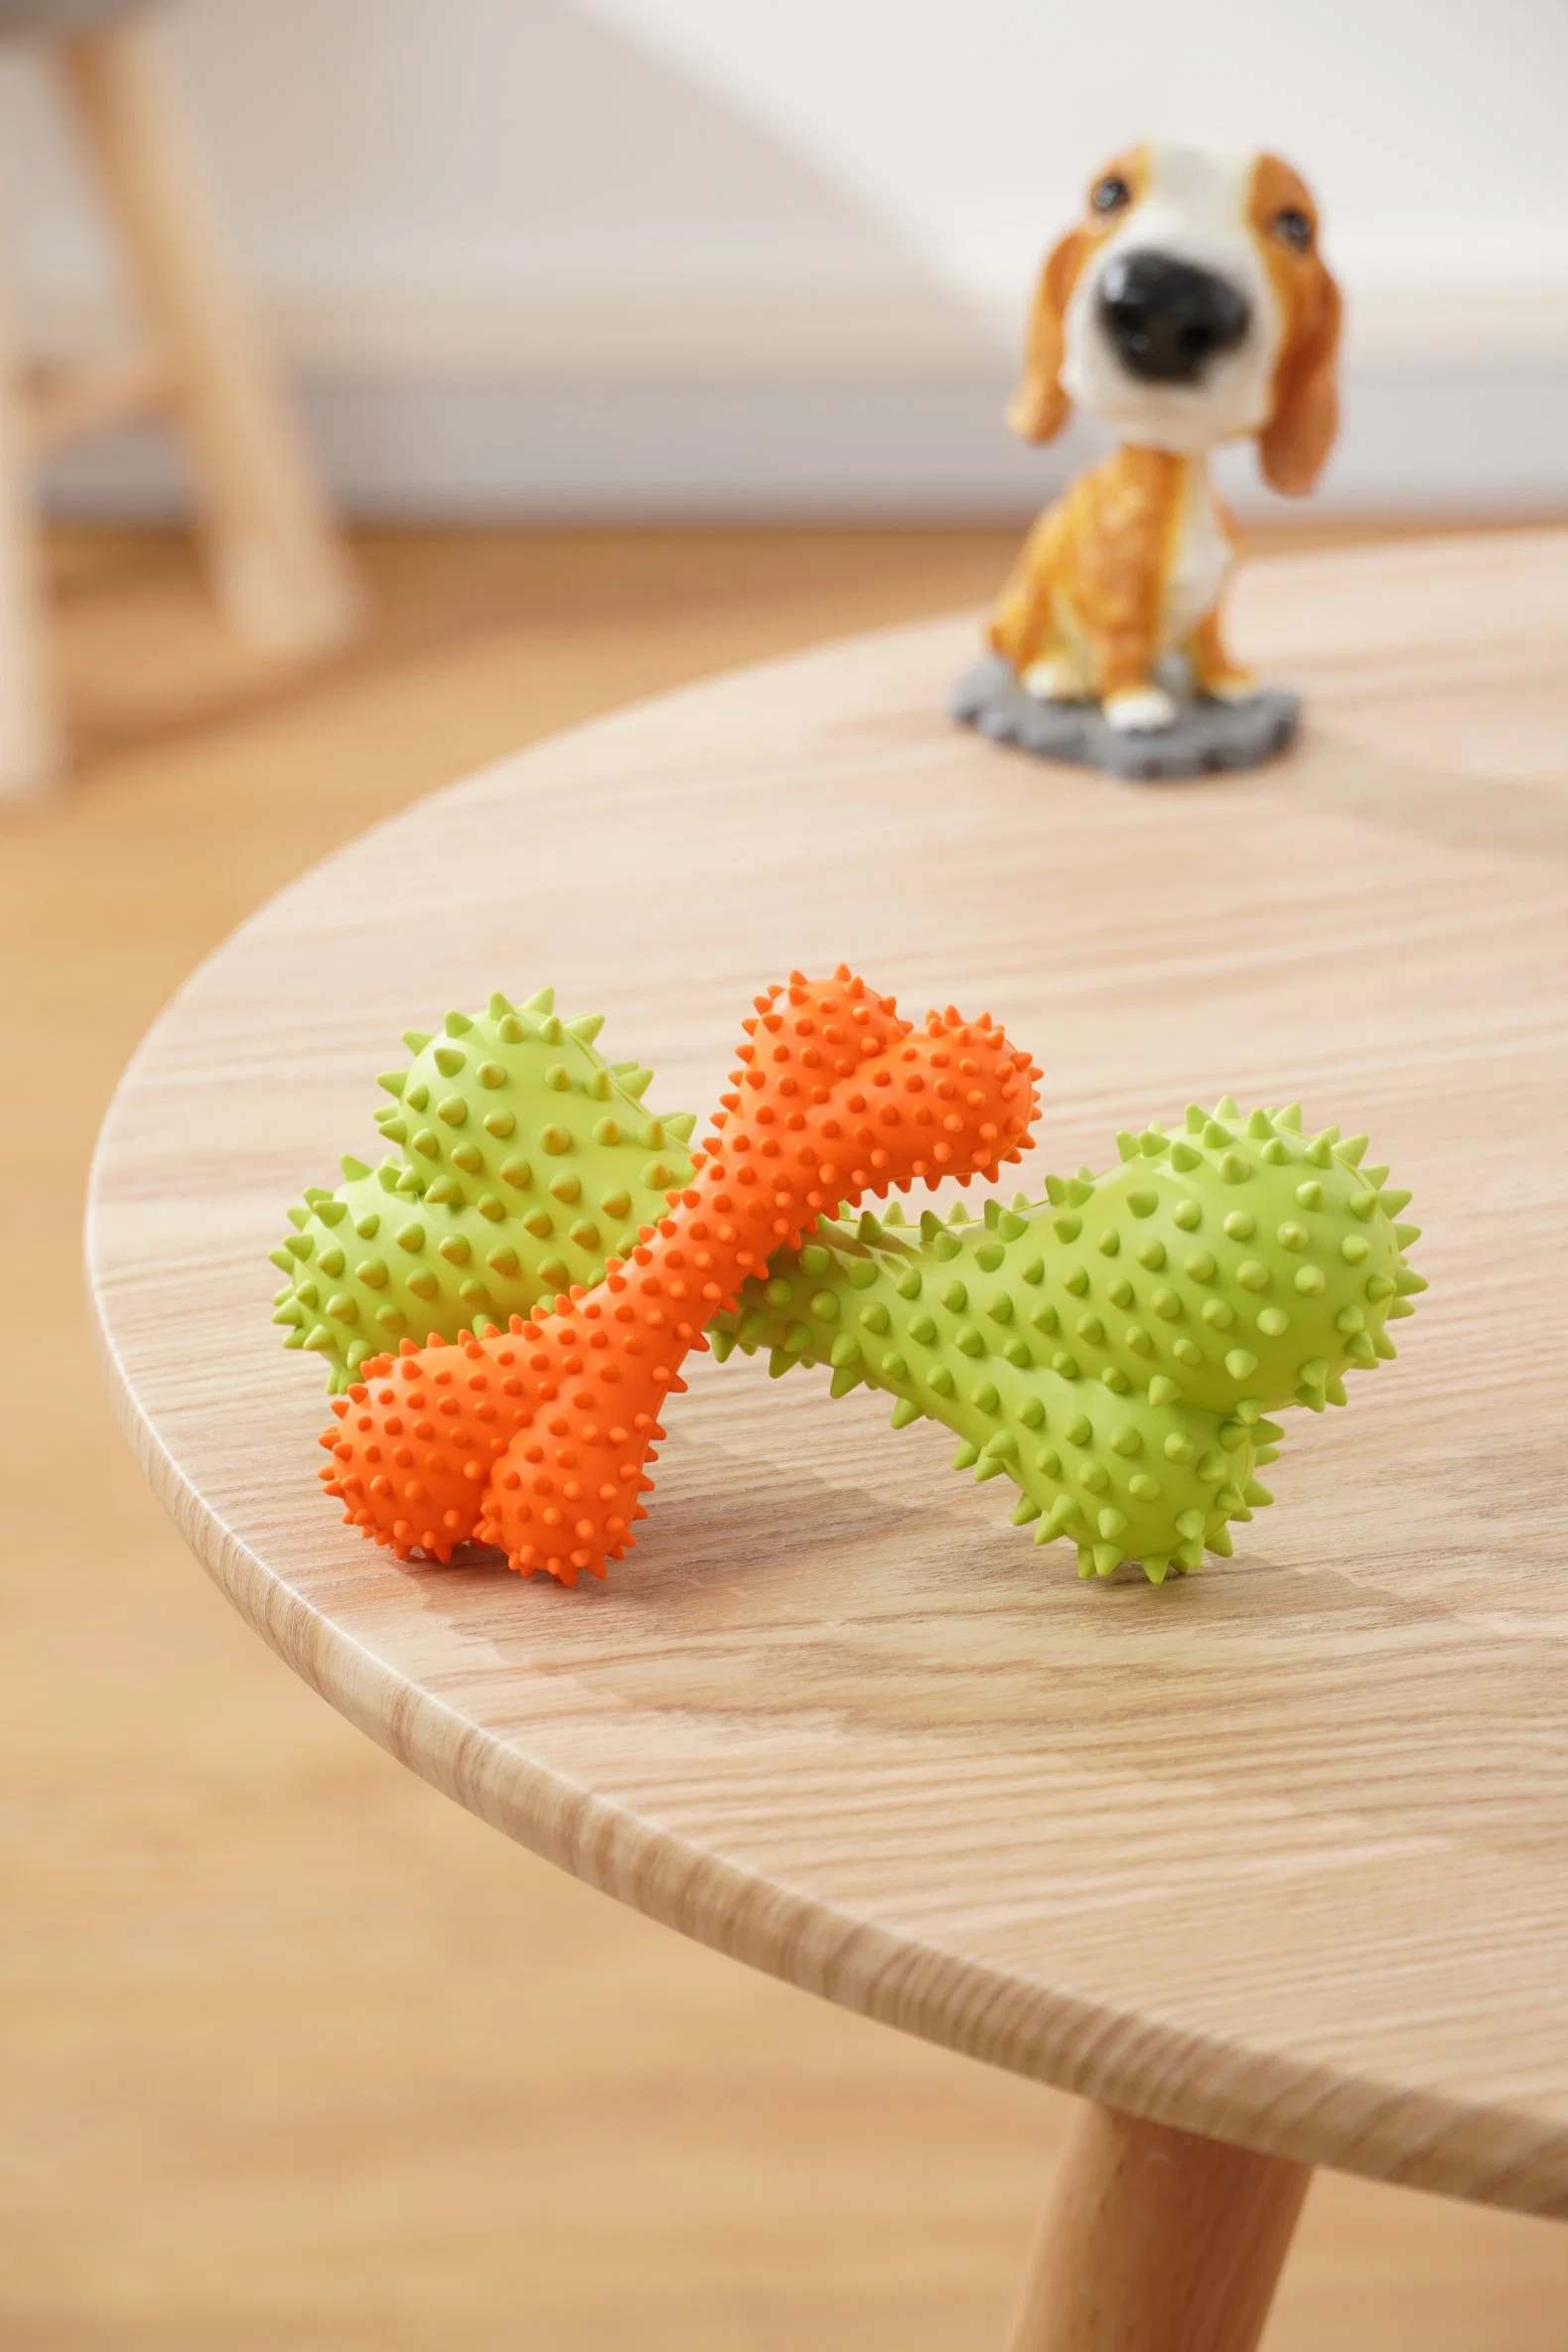 Amazon Pet Toy Hot Sale Rubber Cleaning Spiky Rubber Dog Chew Toy -Bone